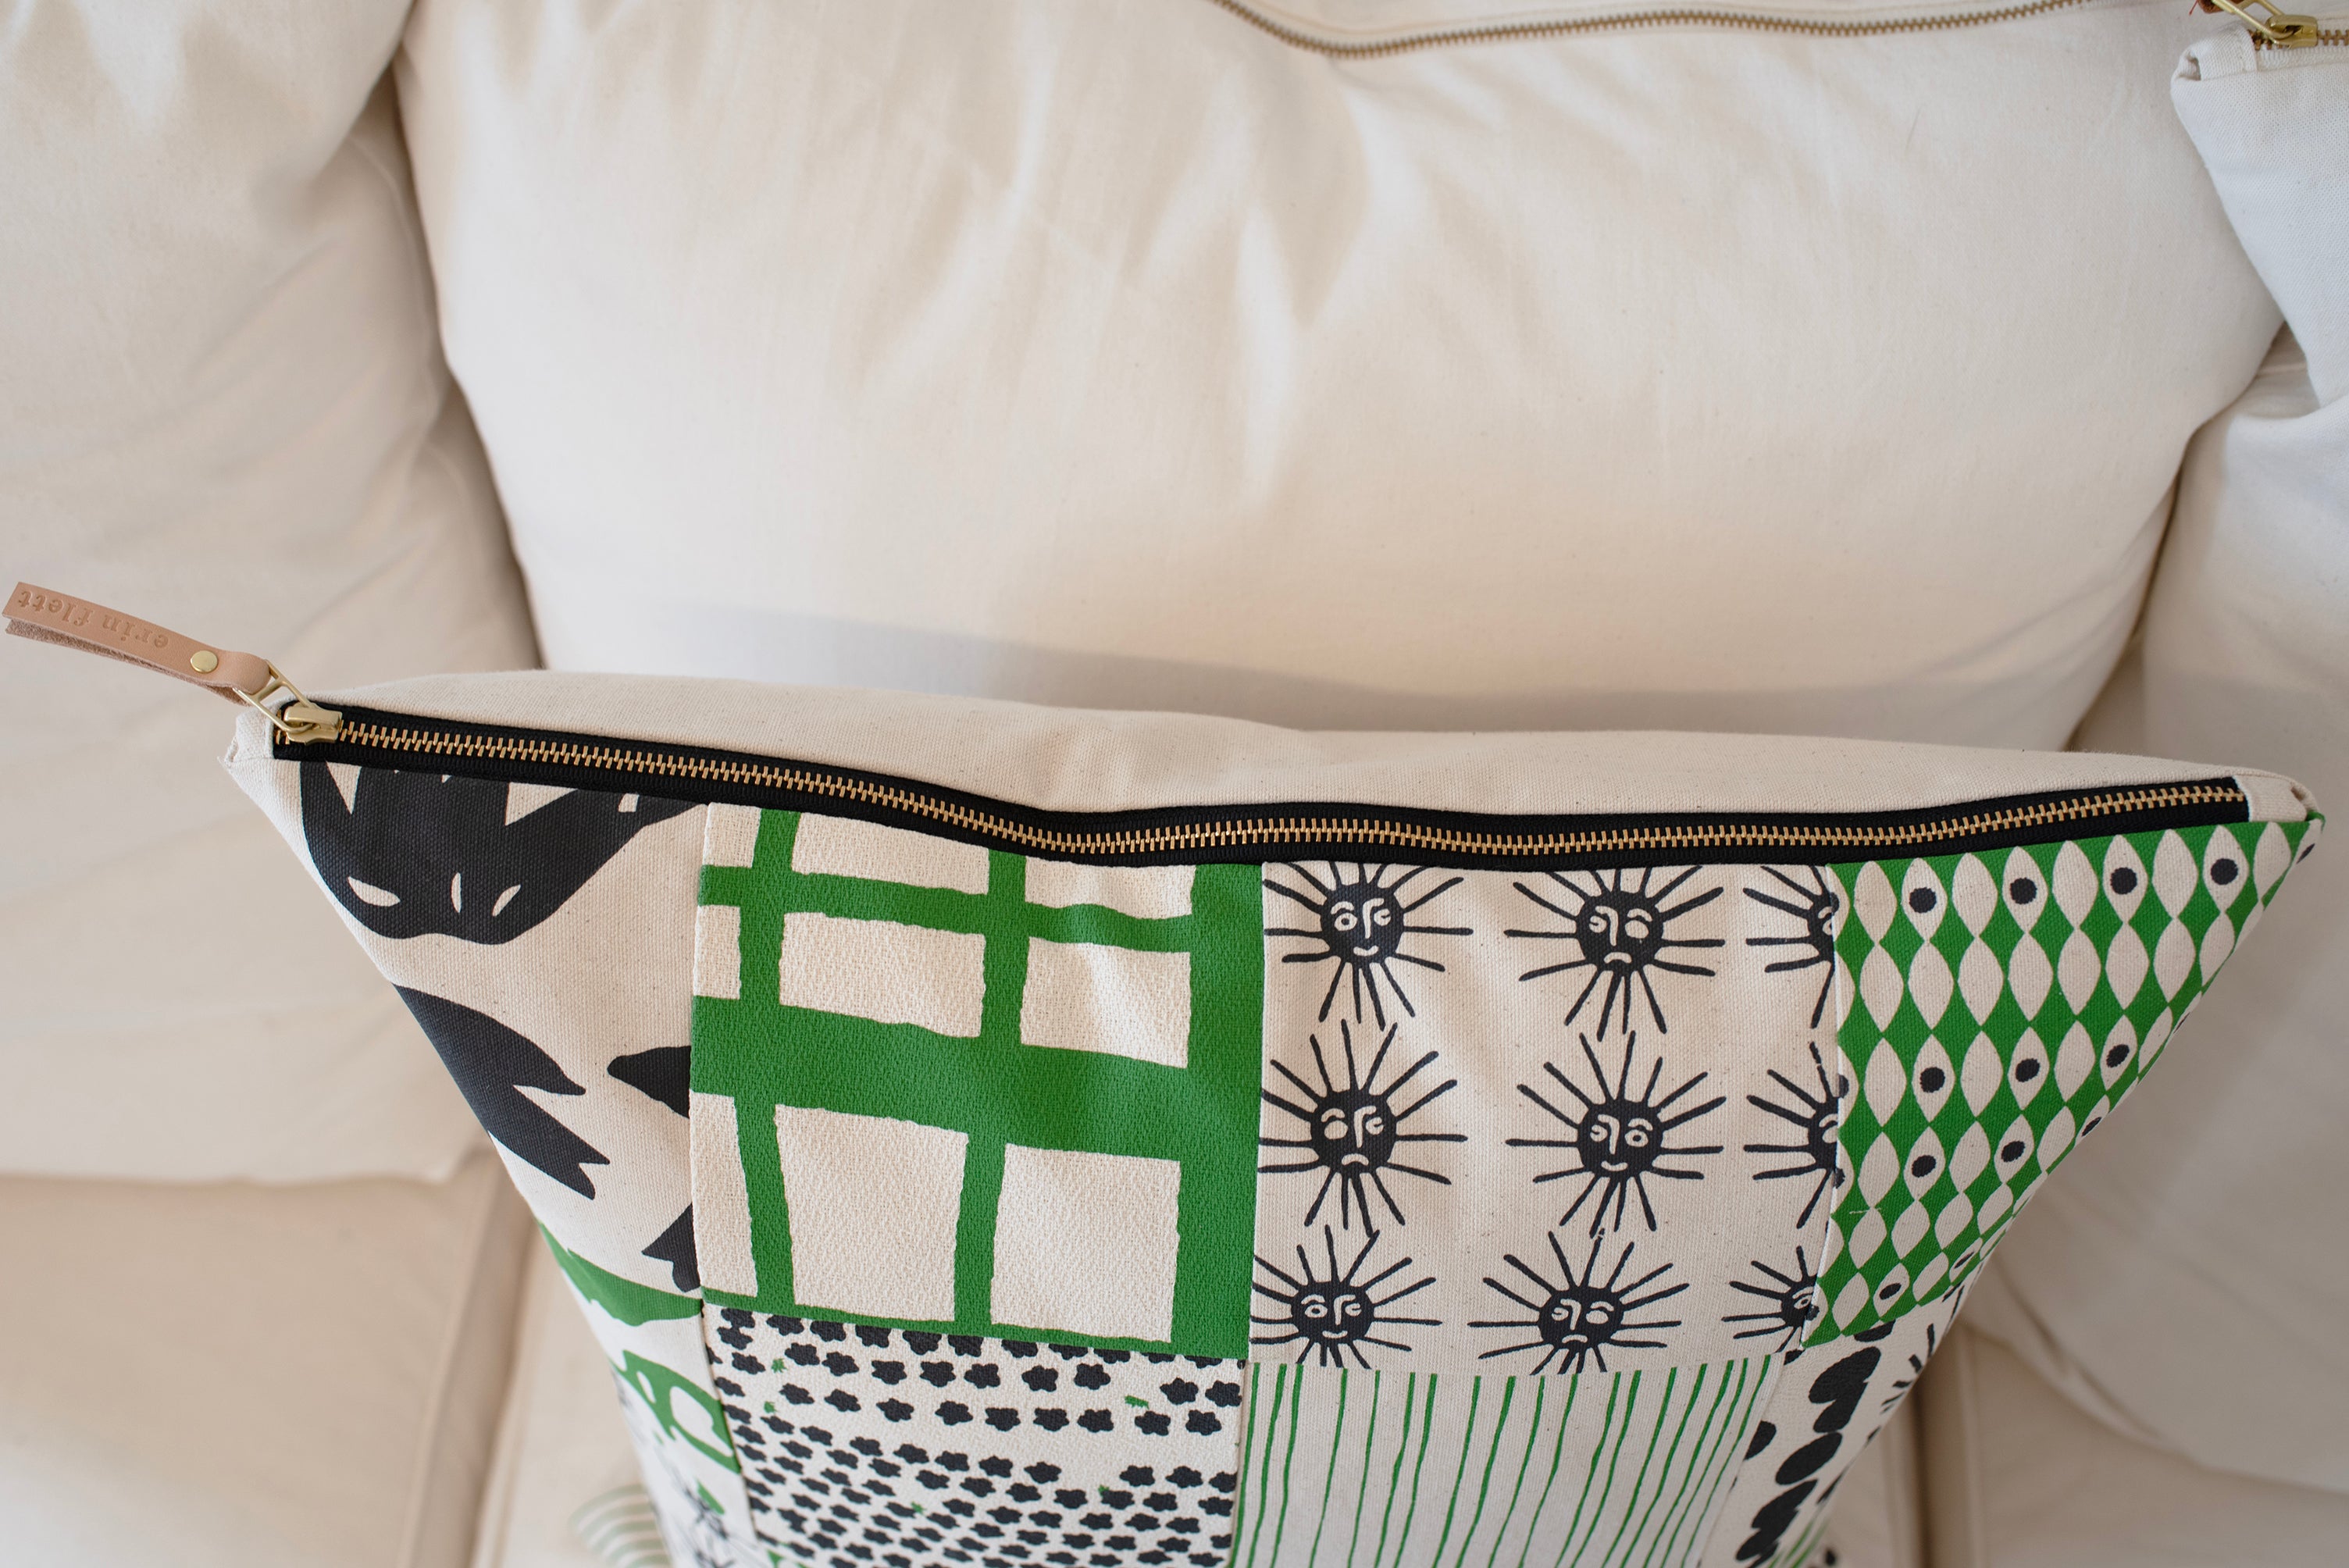 ONE OF A KIND PATCHWORK WORN BLACK AND KELLY GREEN PILLOW